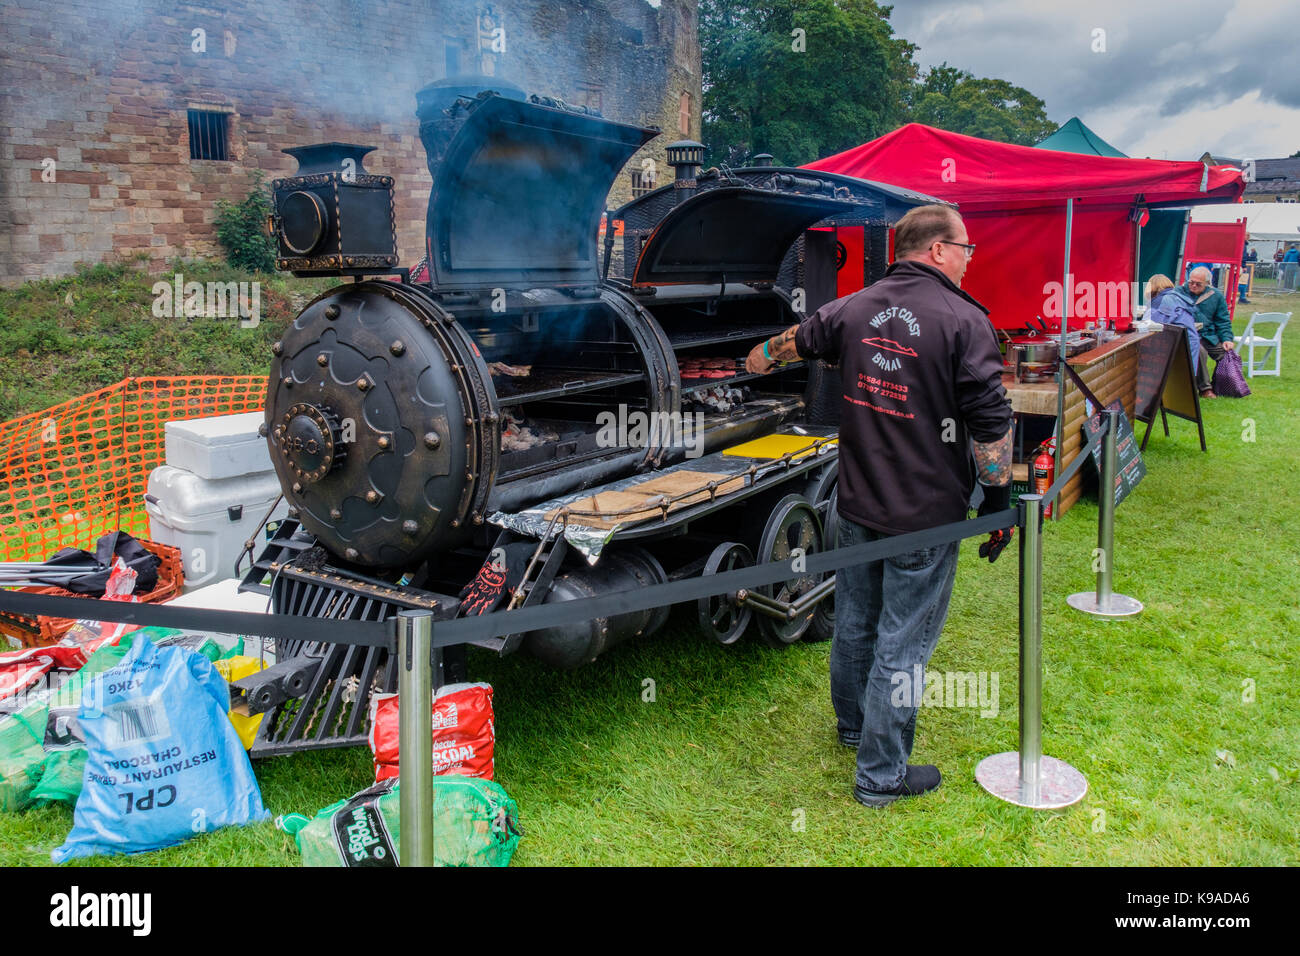 Au 2017 Barbecueing Ludlow Food Festival, Ludlow Castle, Ludlow, Shropshire, Angleterre Banque D'Images